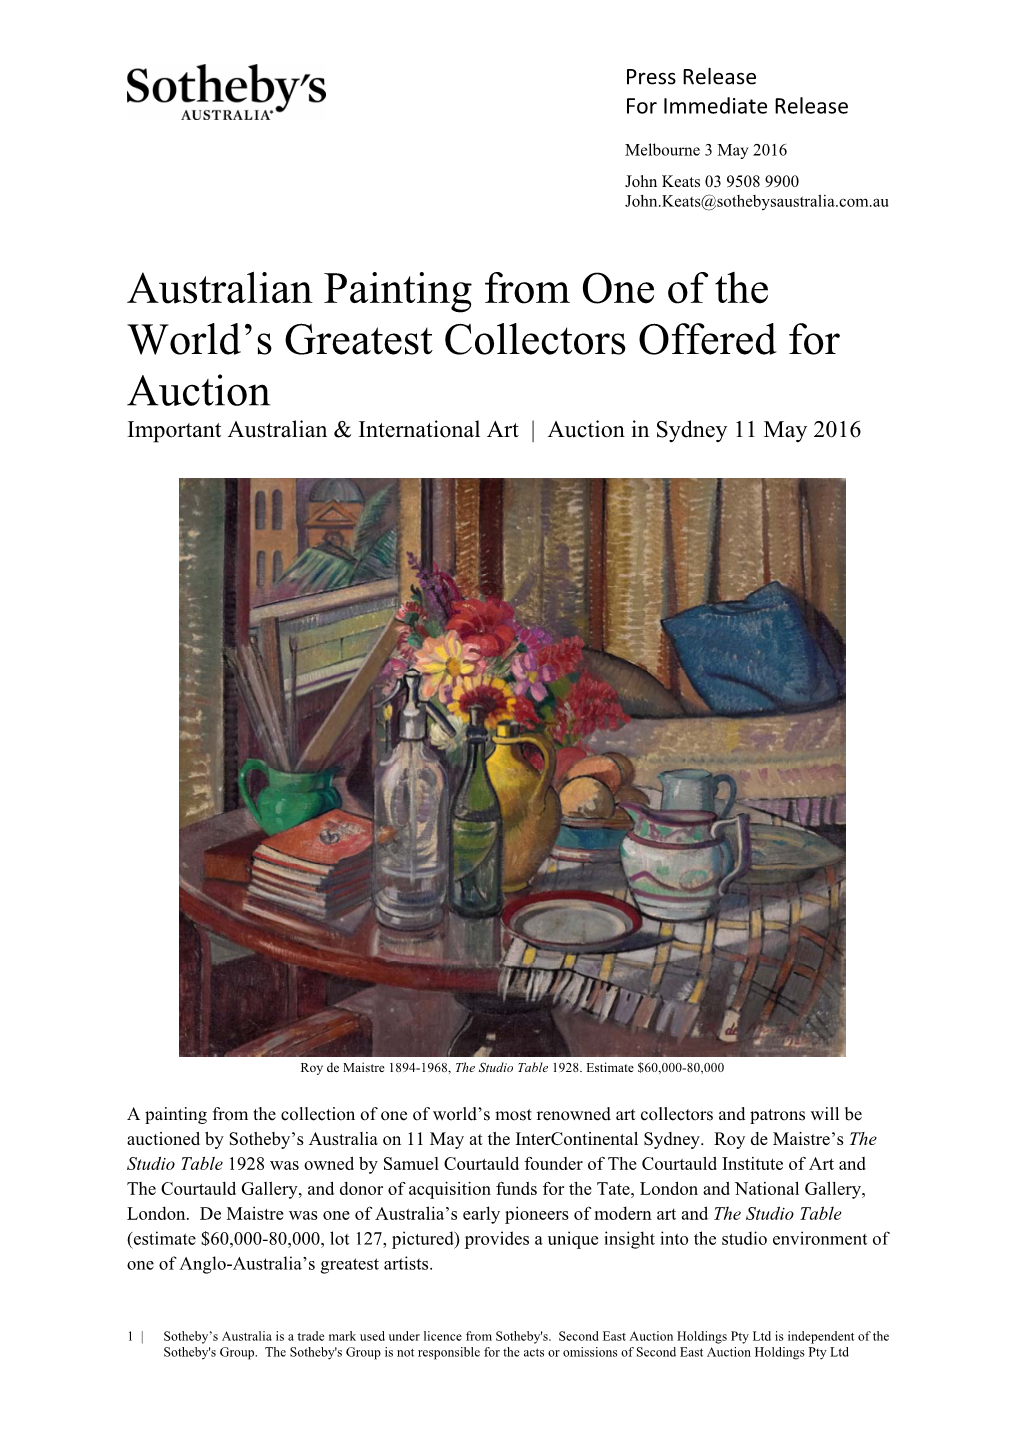 Australian Painting from One of the World's Greatest Collectors Offered